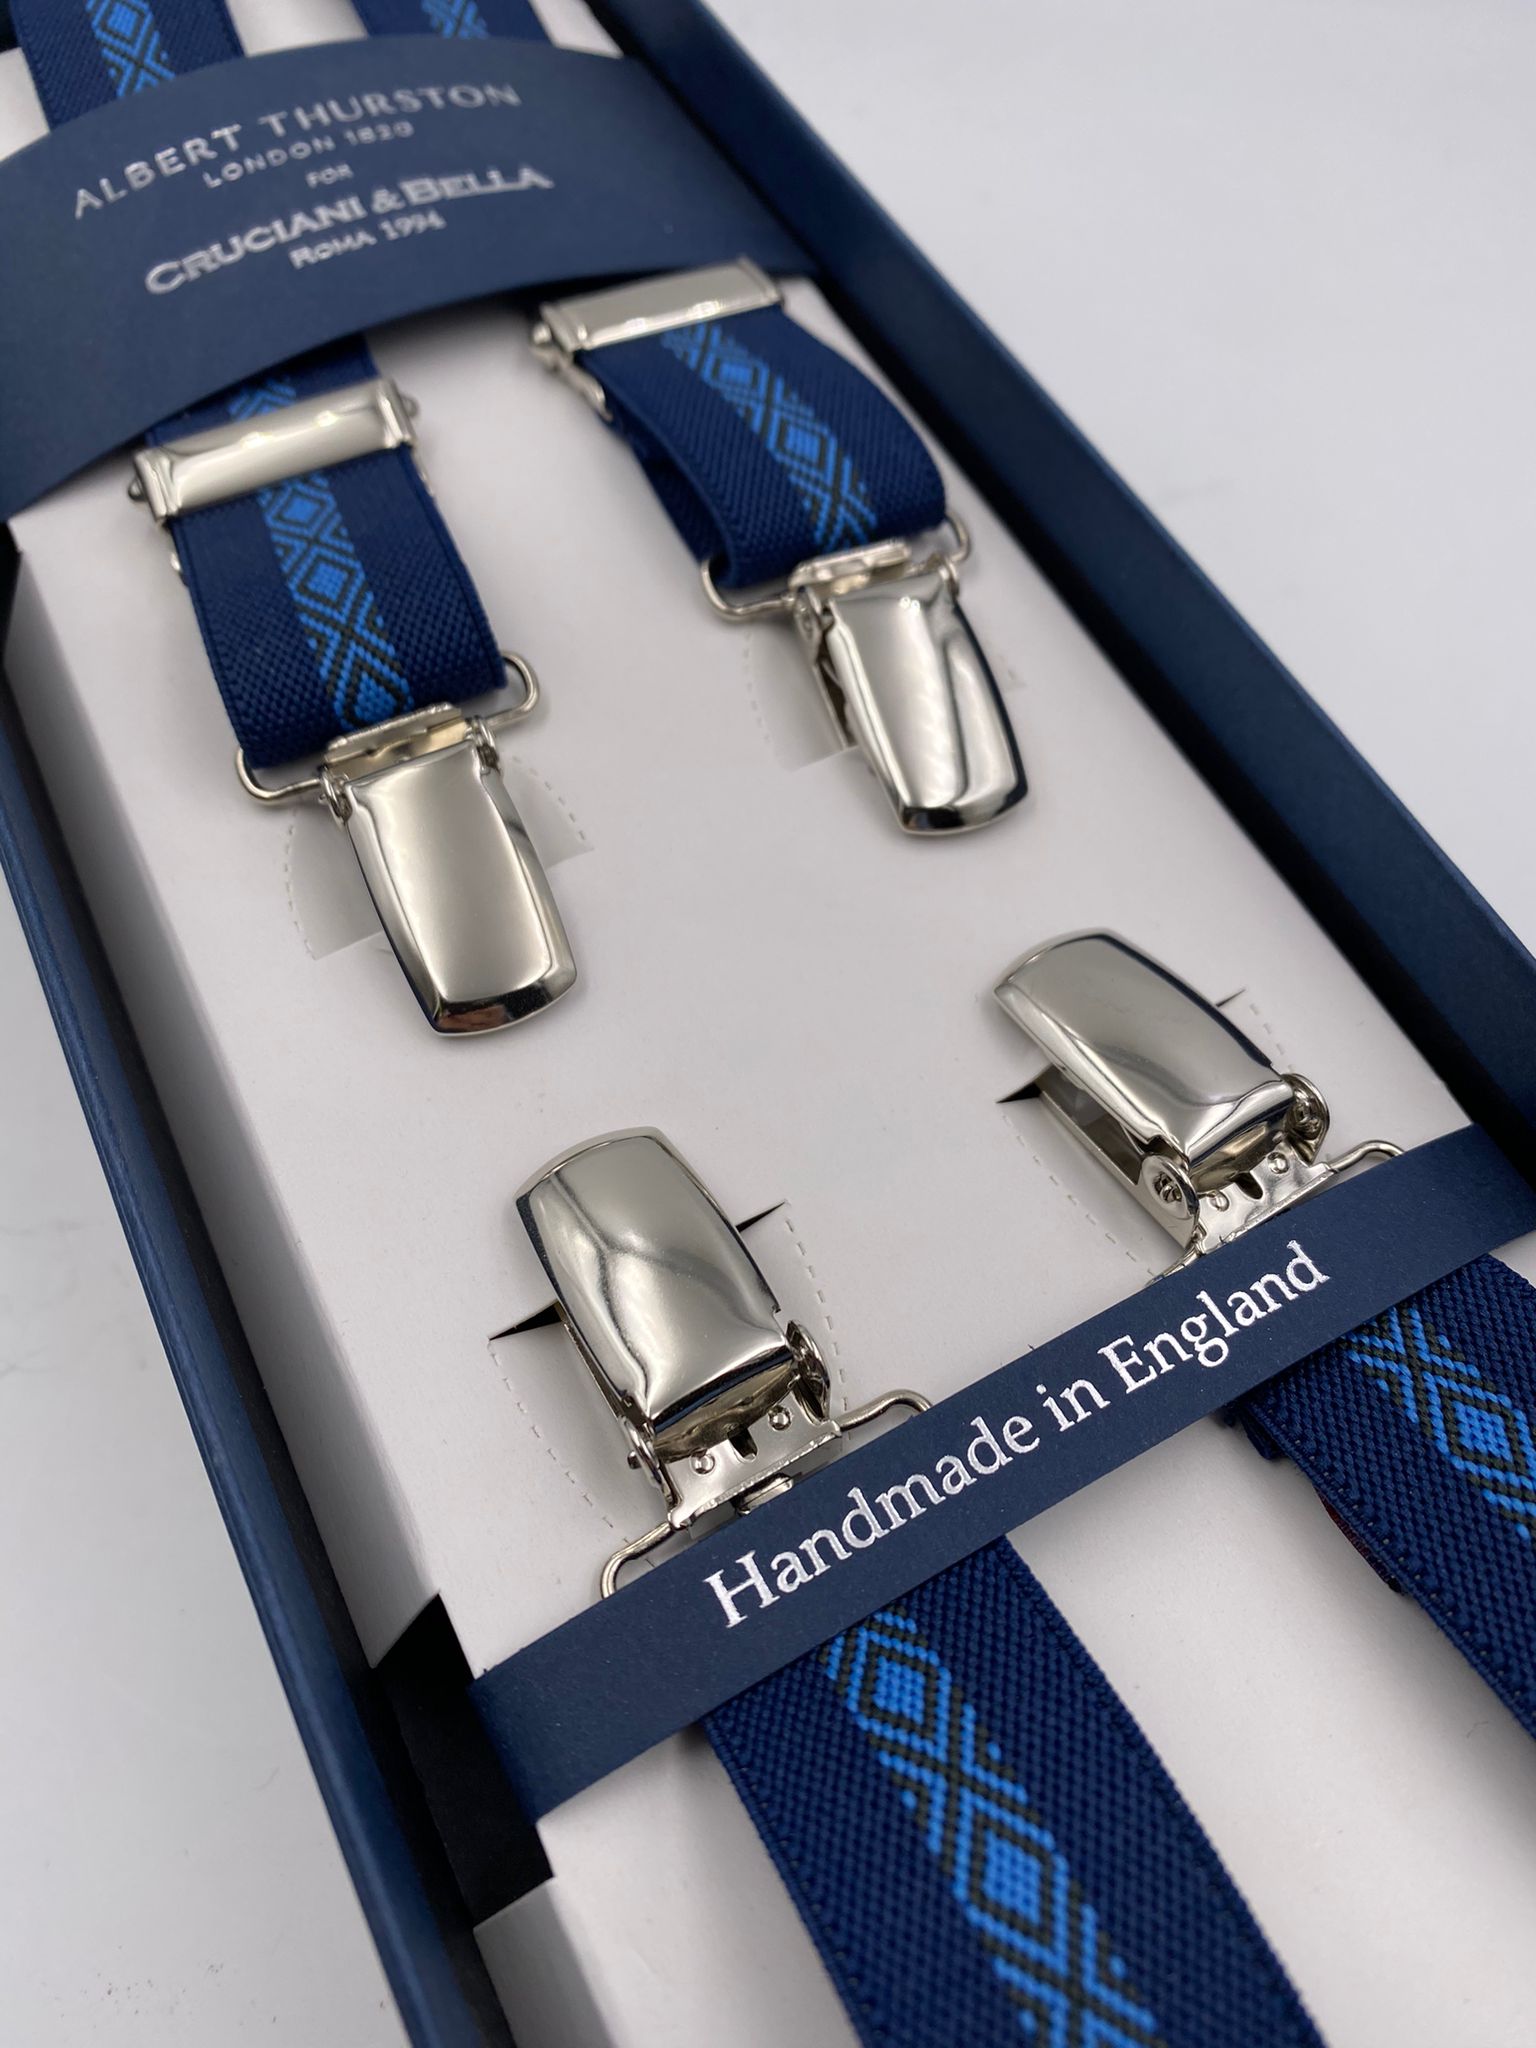 Albert Thurston for Cruciani & Bella Made in England Clip on Adjustable Sizing 25 mm elastic braces Blue and Light Blue Patterned X-Shaped Nickel Fittings Size: L #4837